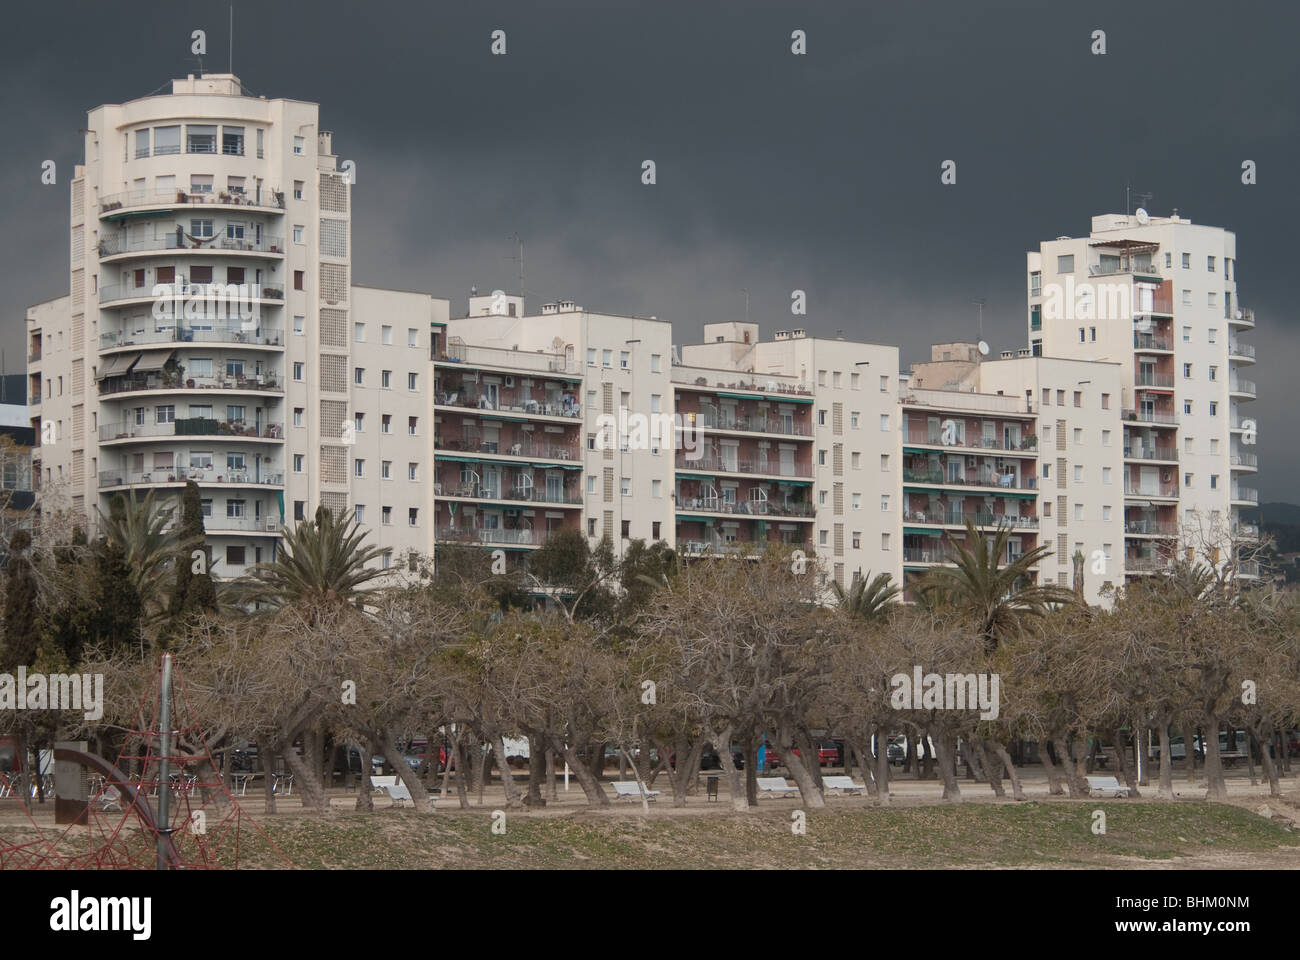 Tower blocks with looming storm approaching. Stock Photo